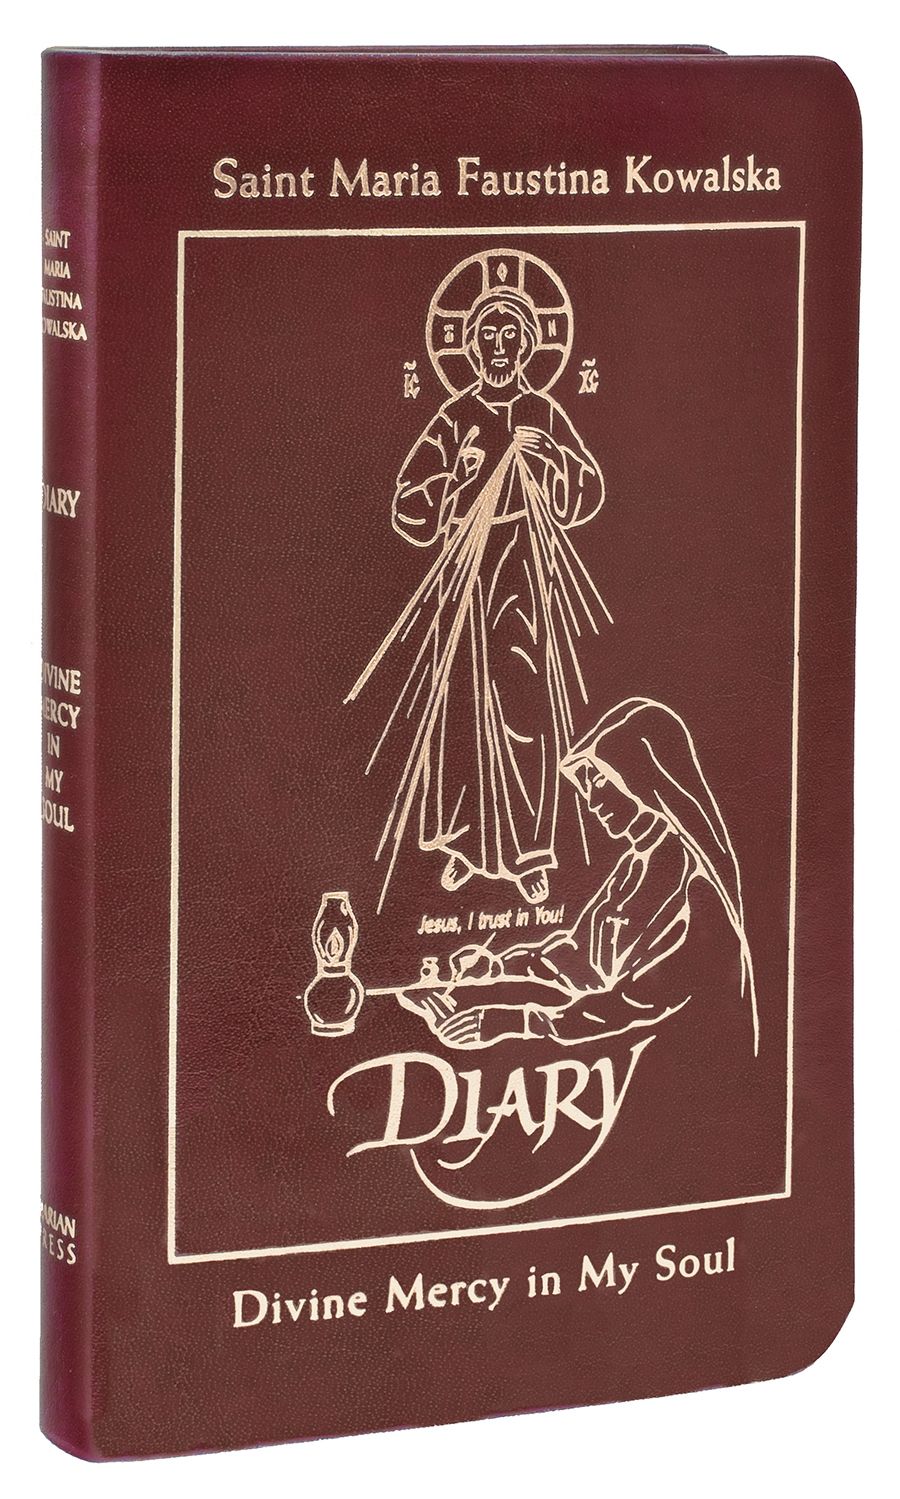 Diary of Saint Maria Faustina Kowalska: Divine Mercy in My Soul [Deluxe Burgundy Leather]